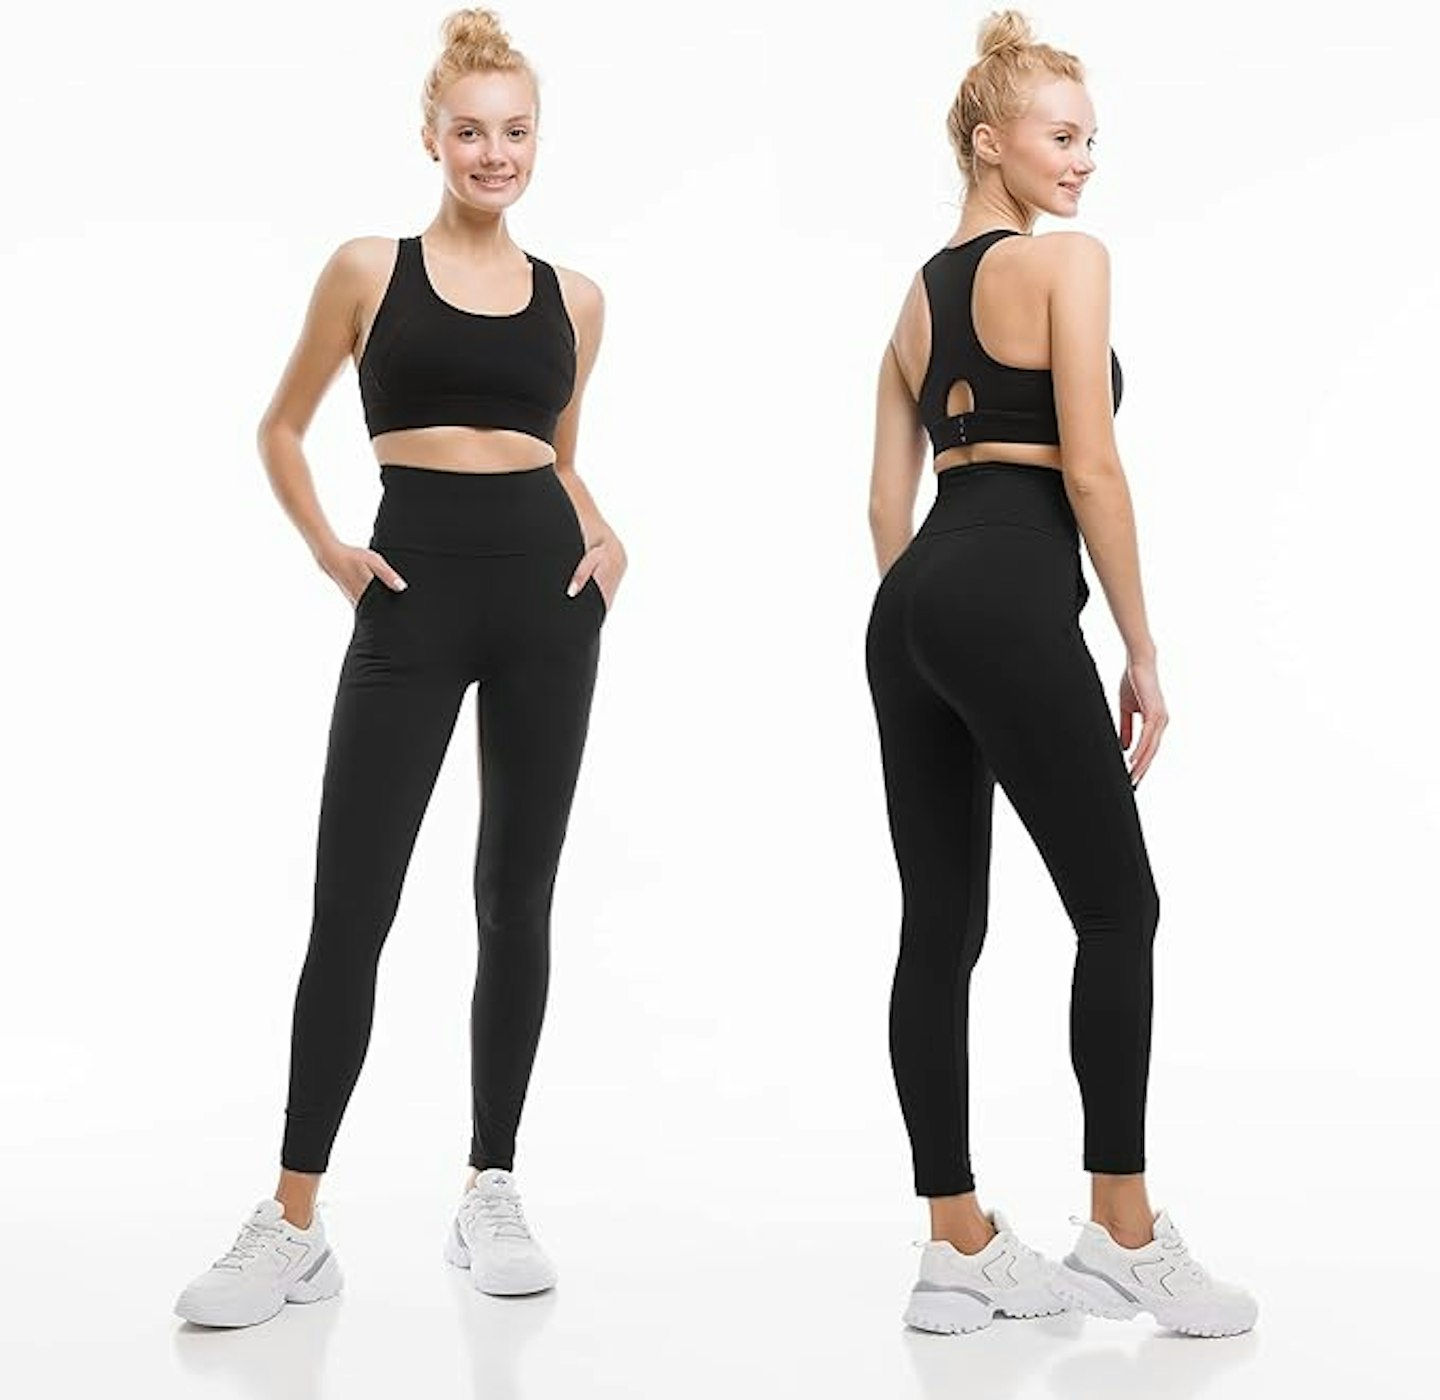 I'm A Shopping Editor And My Favourite Black Leggings Are Just £10